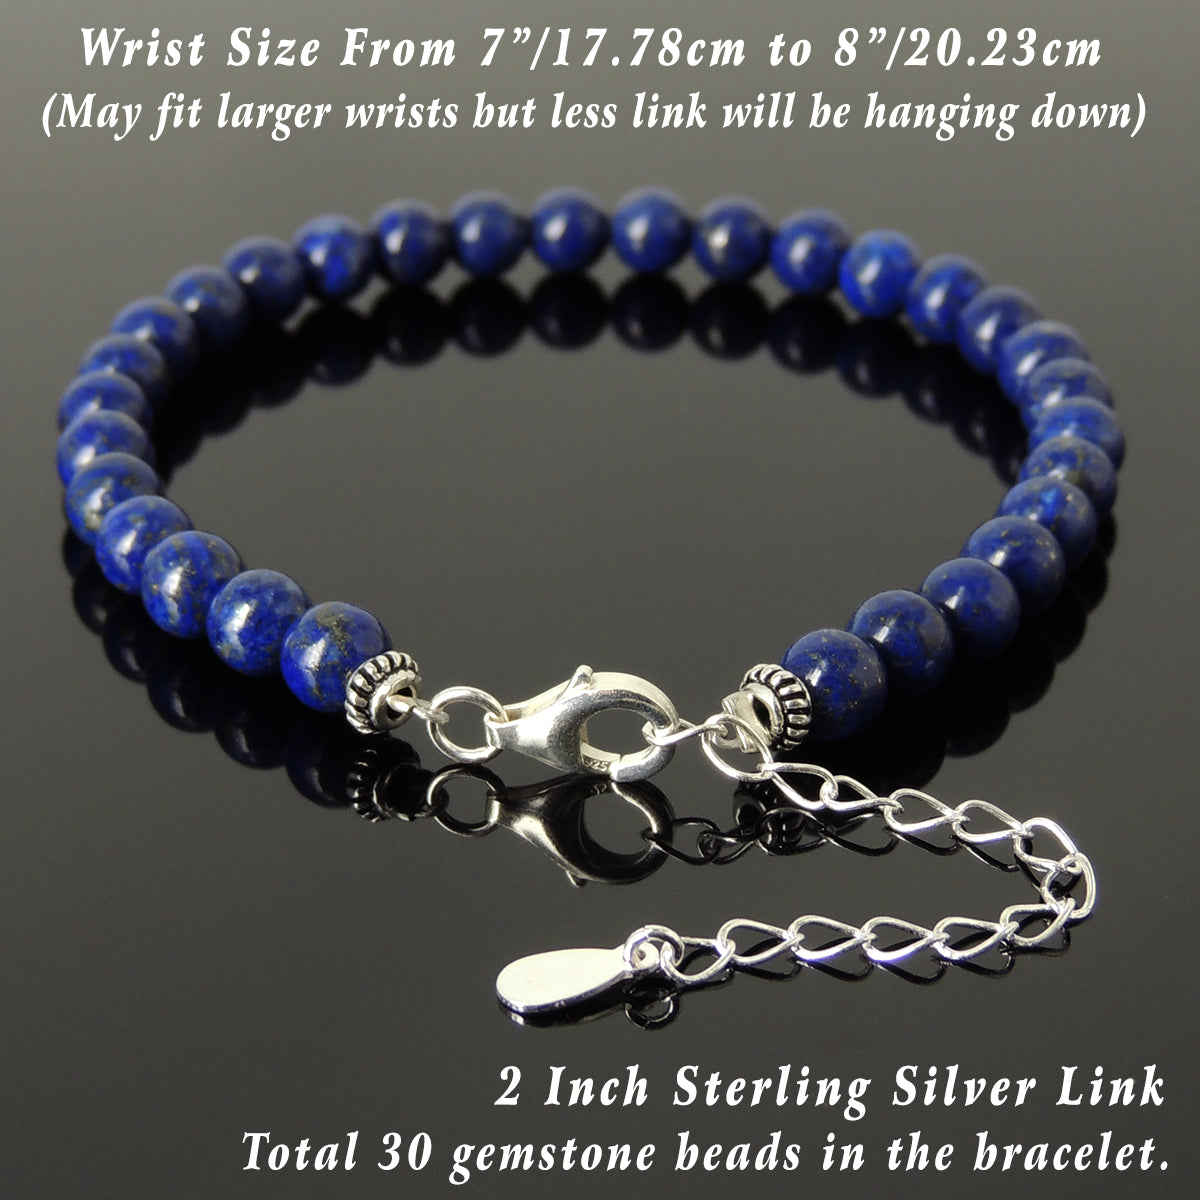 6mm Lapis Lazuli Healing Gemstone Bracelet with S925 Sterling Silver Chain & Clasp - Handmade by Gem & Silver BR1239